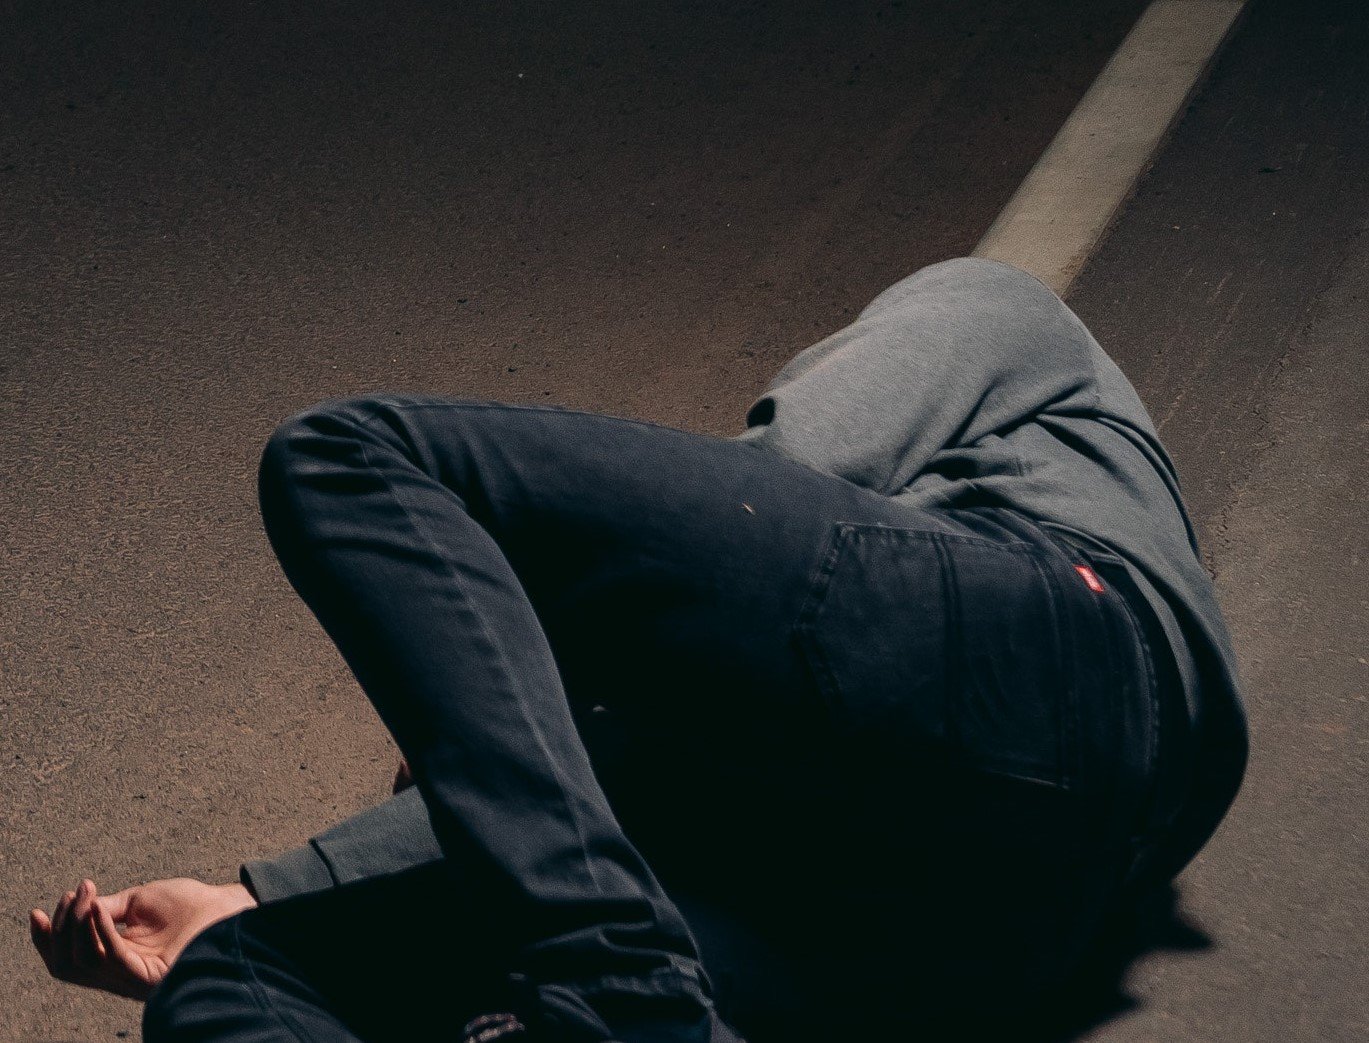 Brody blacked out after he fell from his bike. | Source: Pexels